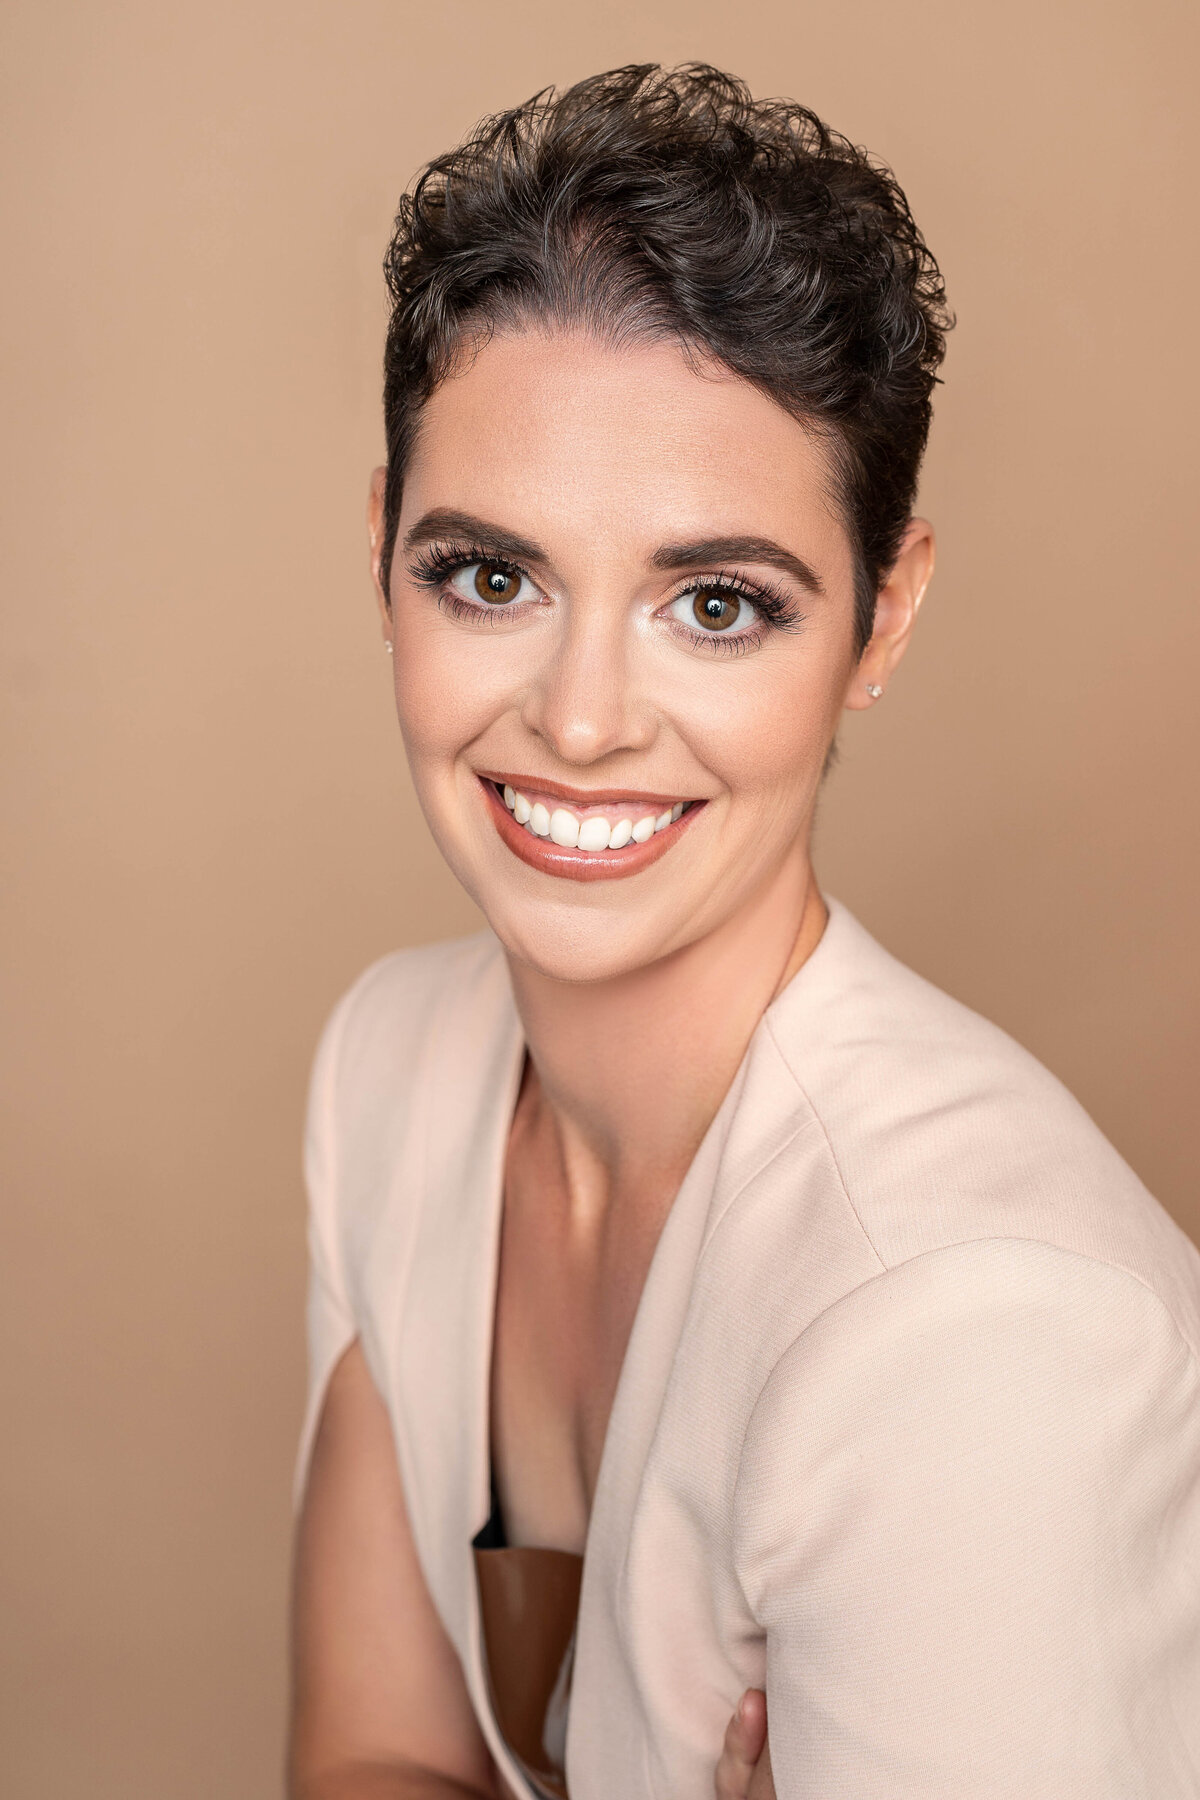 Professional personal branding image of a woman